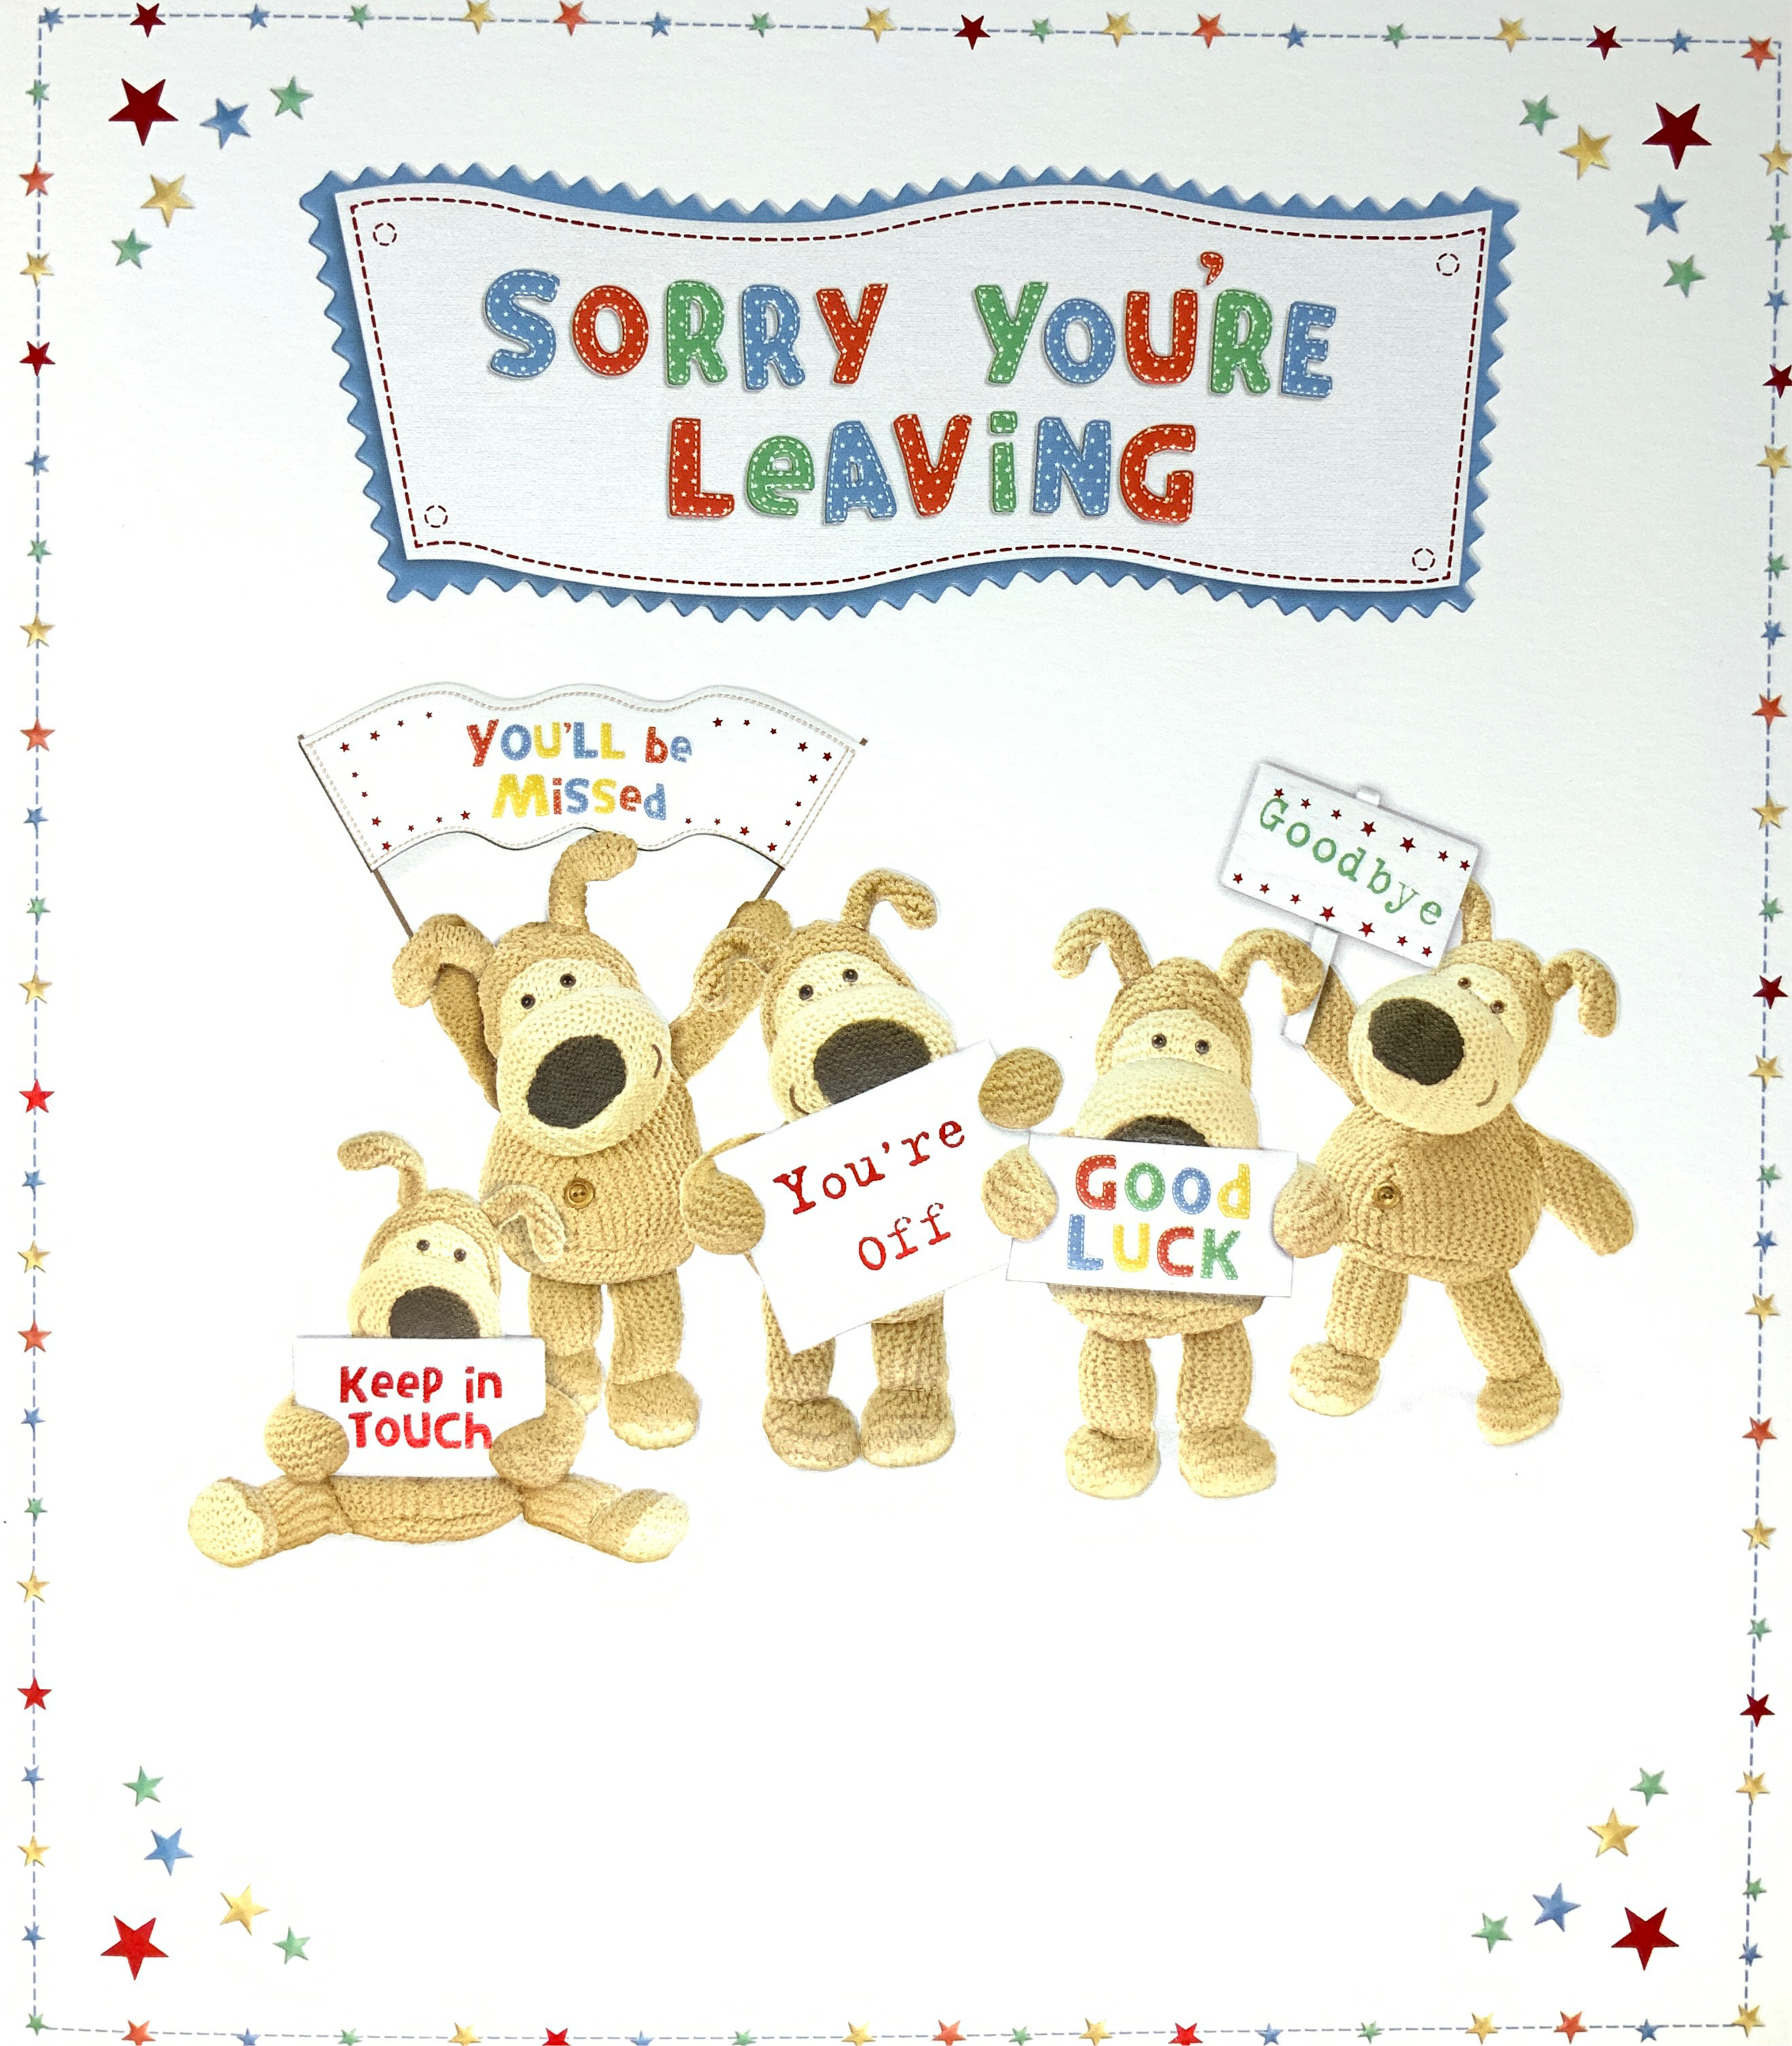 Sorry You’re Leaving Card - Cute Doggies With Banners ( Large - A4 Size )